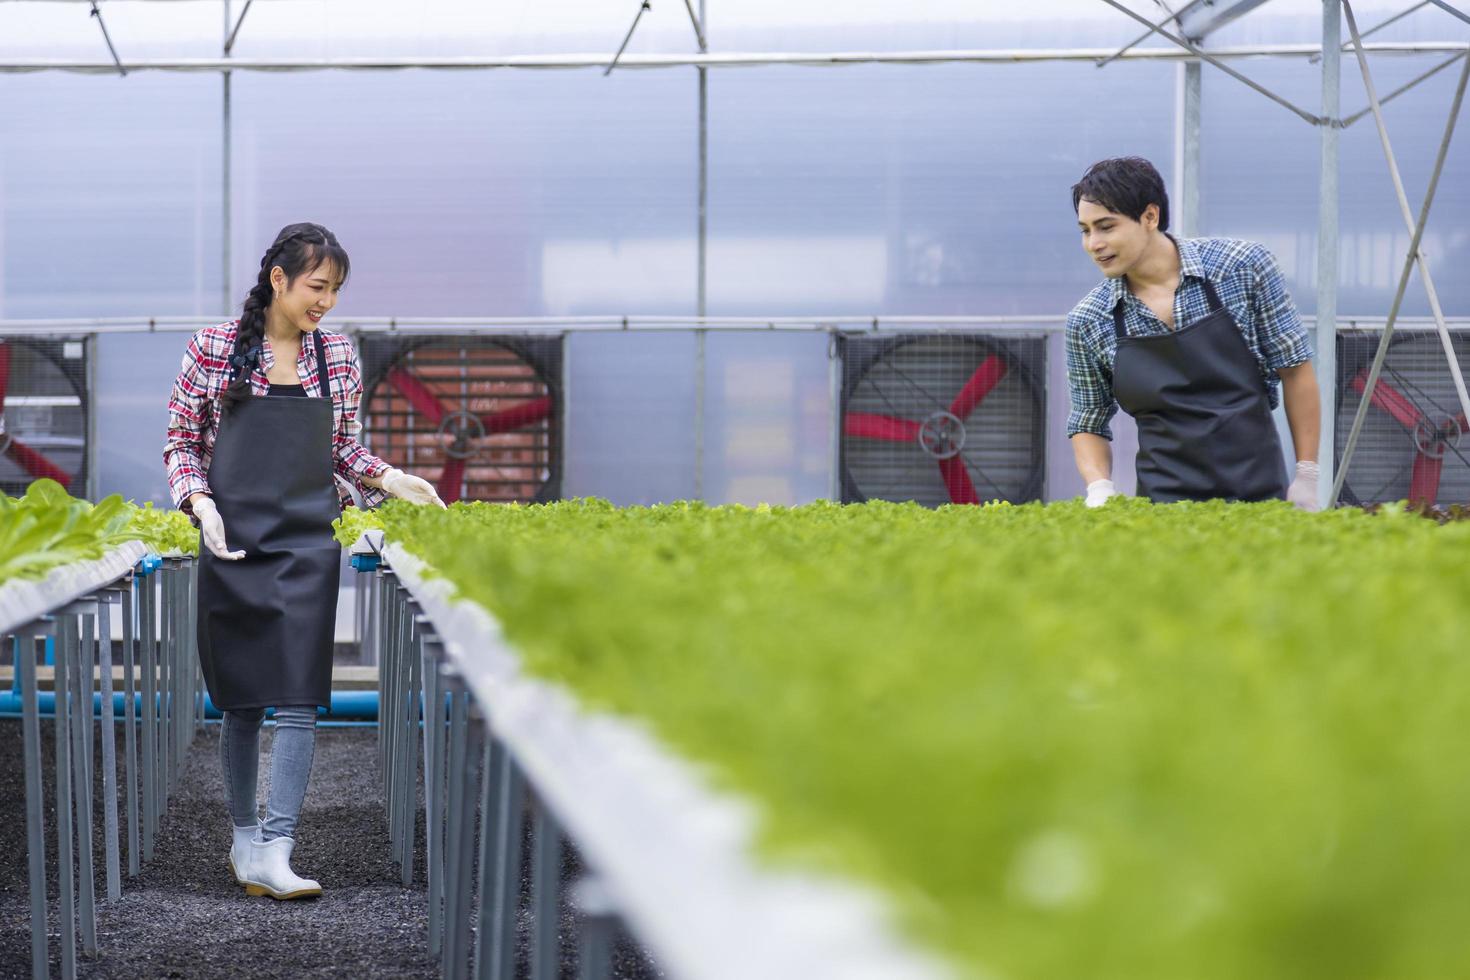 Asian local farmers growing their own green oak salad lettuce in the greenhouse using hydroponics water system organic approach for family business photo